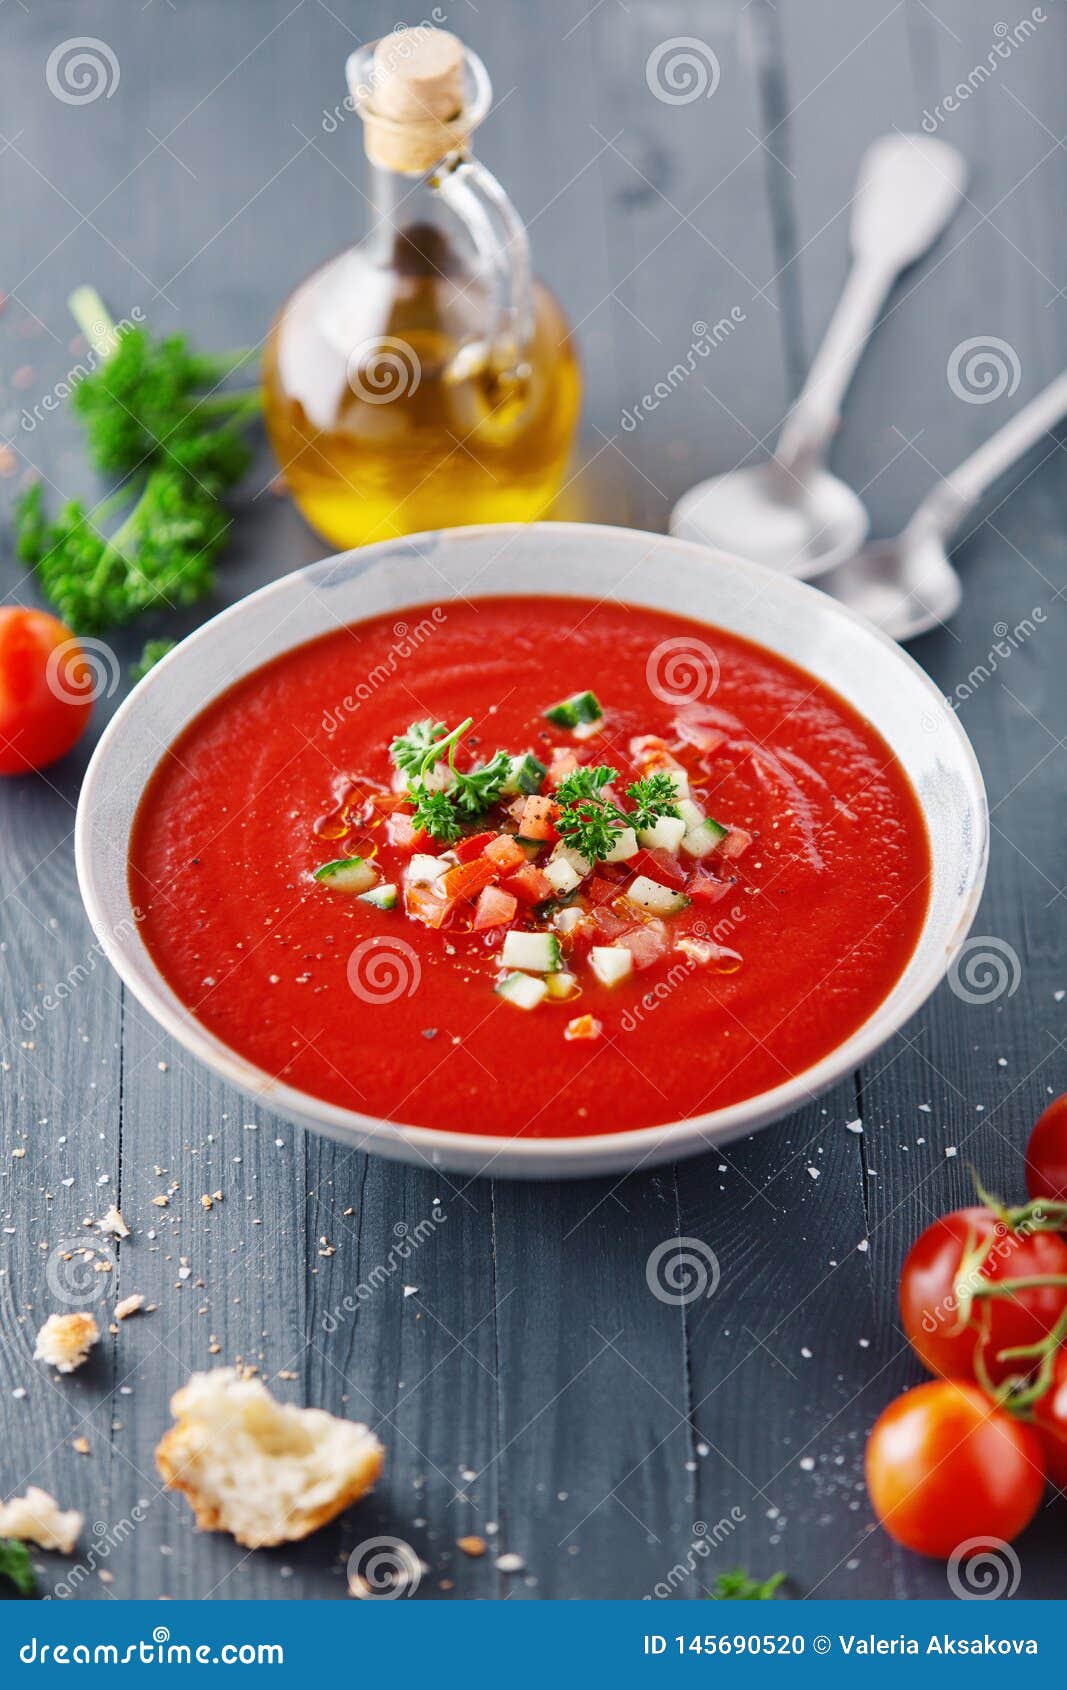 Tasty Summer Tomato Soup Served In Bowl Stock Photo - Image of green ...